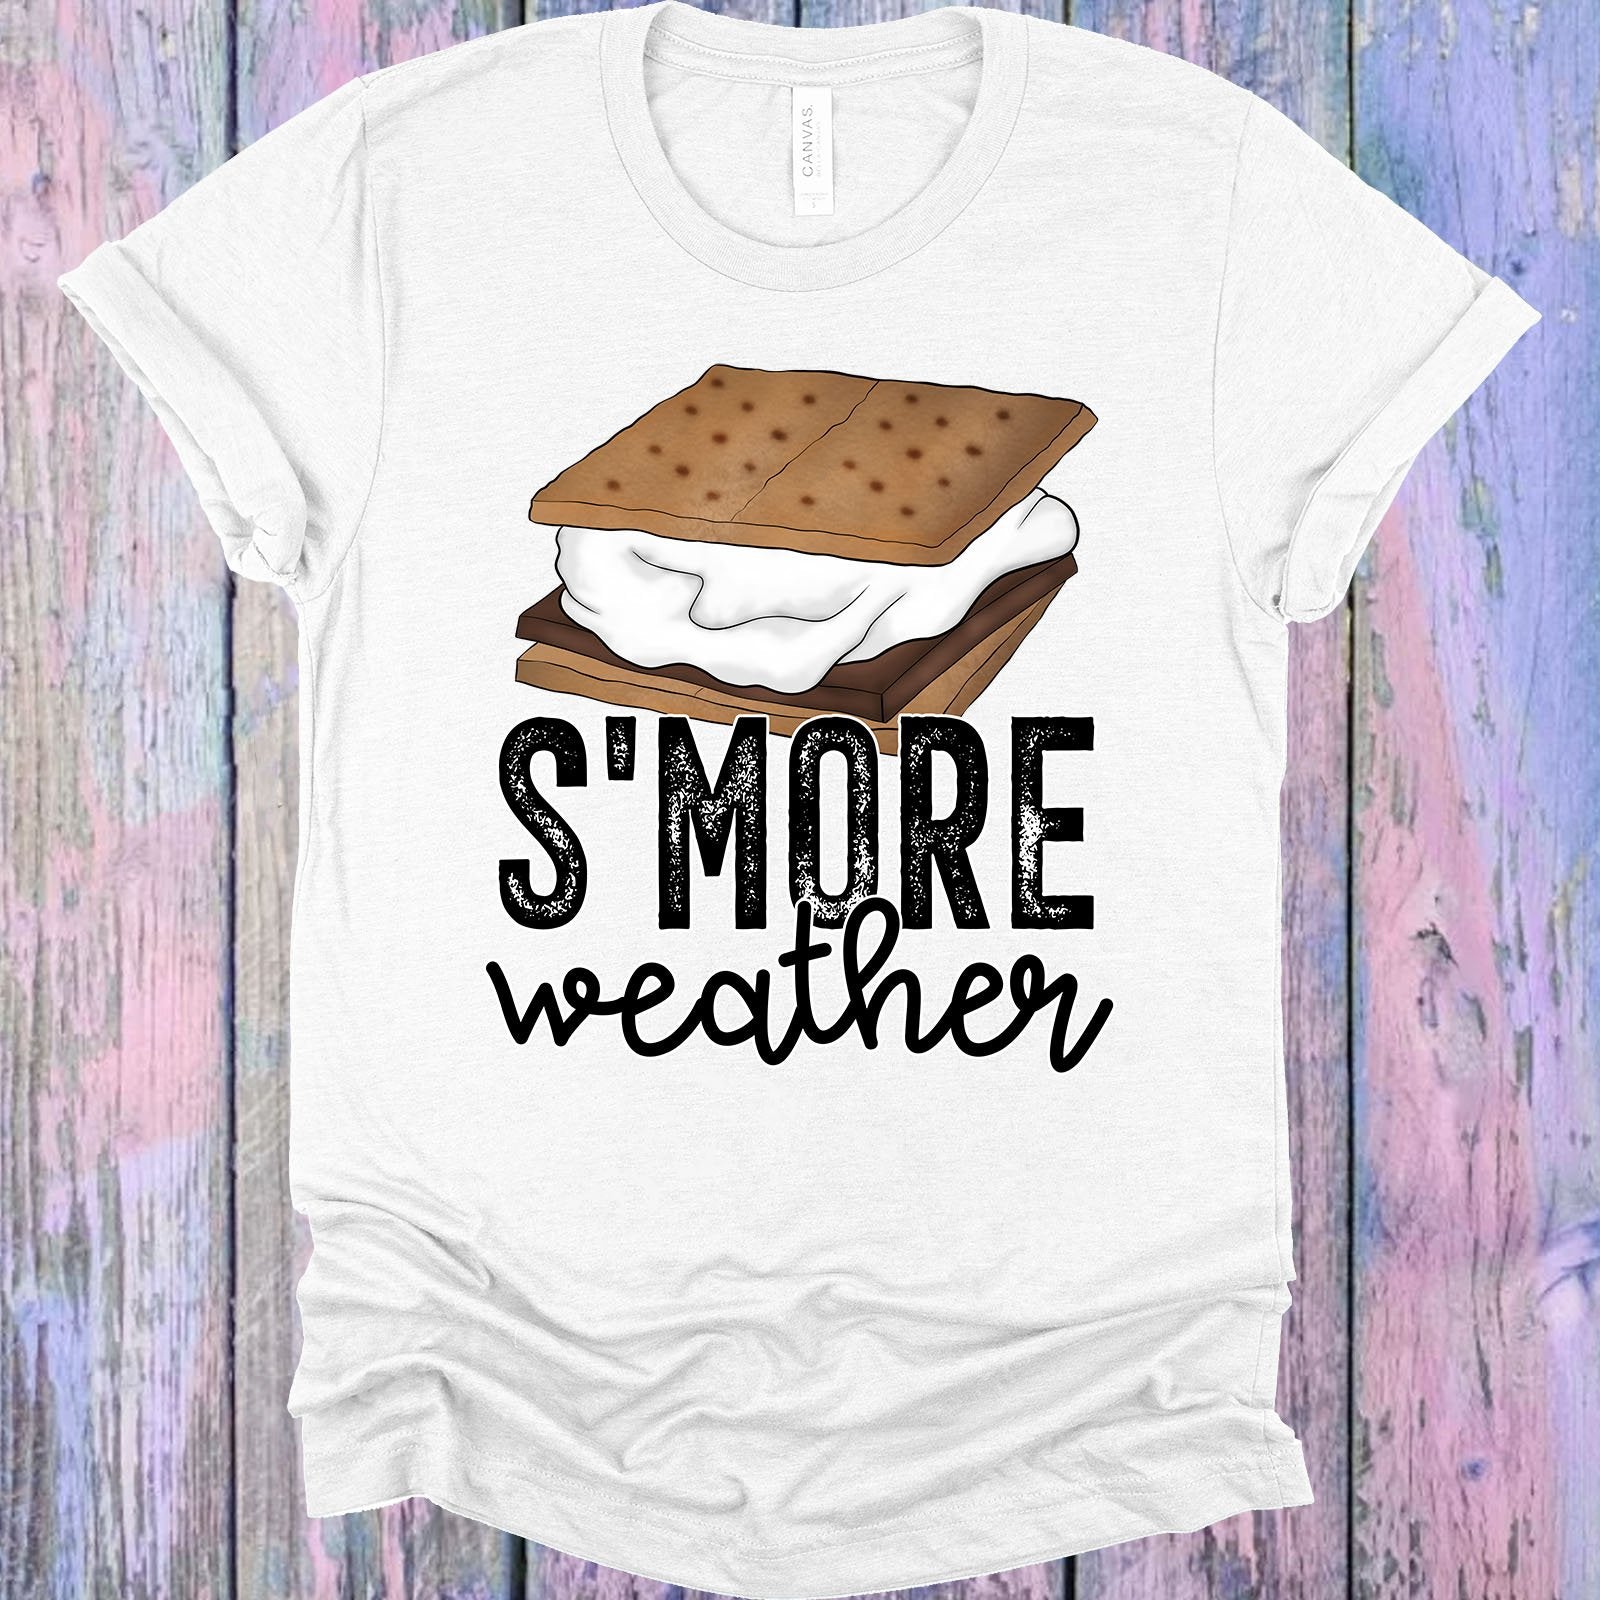 Smore Weather Graphic Tee Graphic Tee